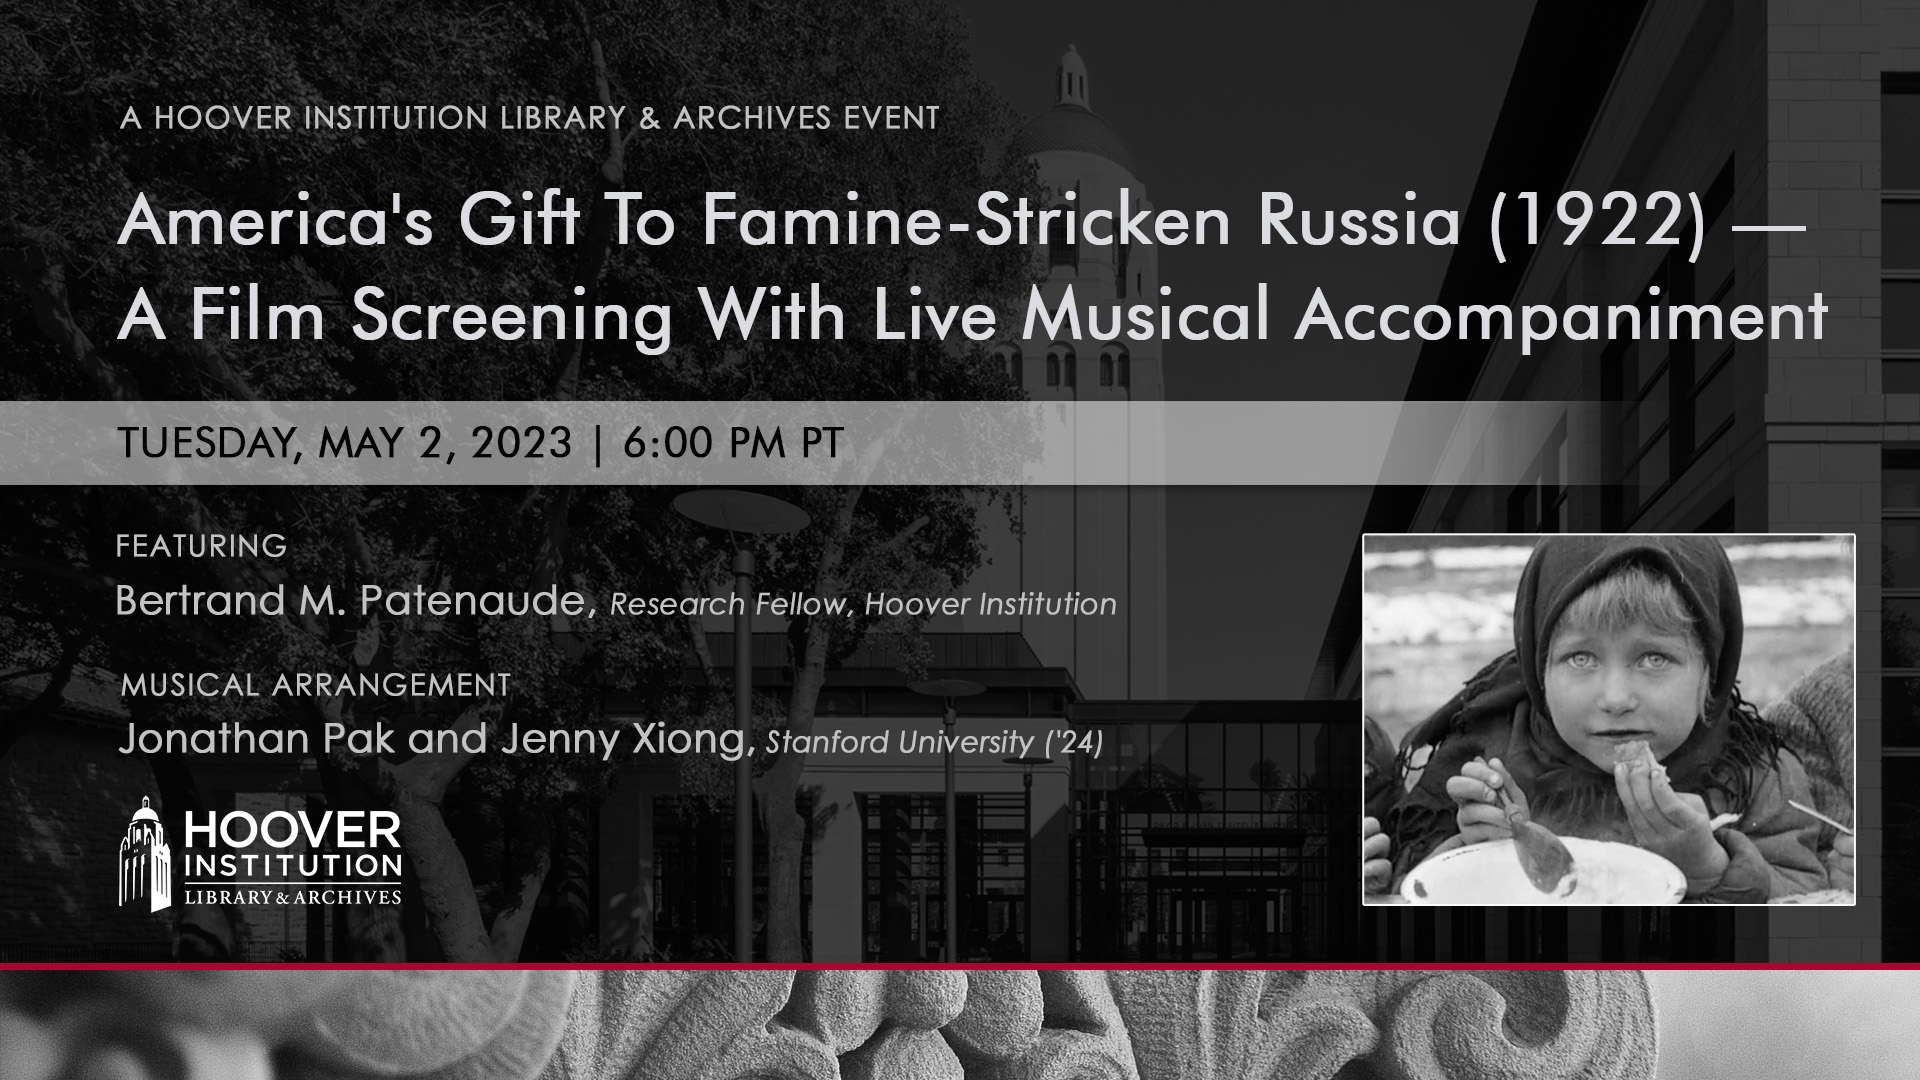 America's Gift To Famine-Stricken Russia (1922)— A Film Screening With Live Musical Accompaniment